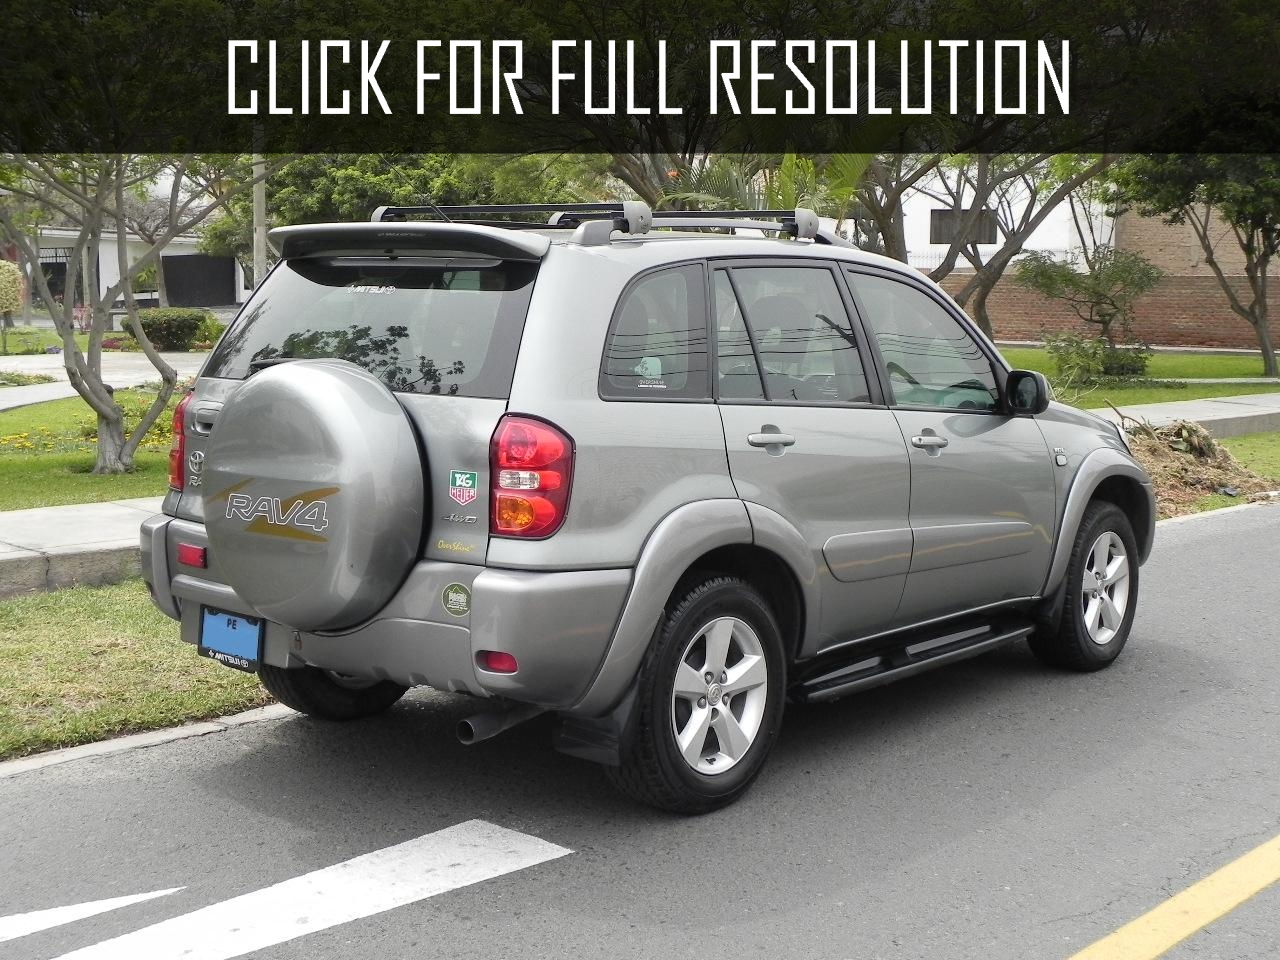 2004 Toyota Rav4 4wd news, reviews, msrp, ratings with